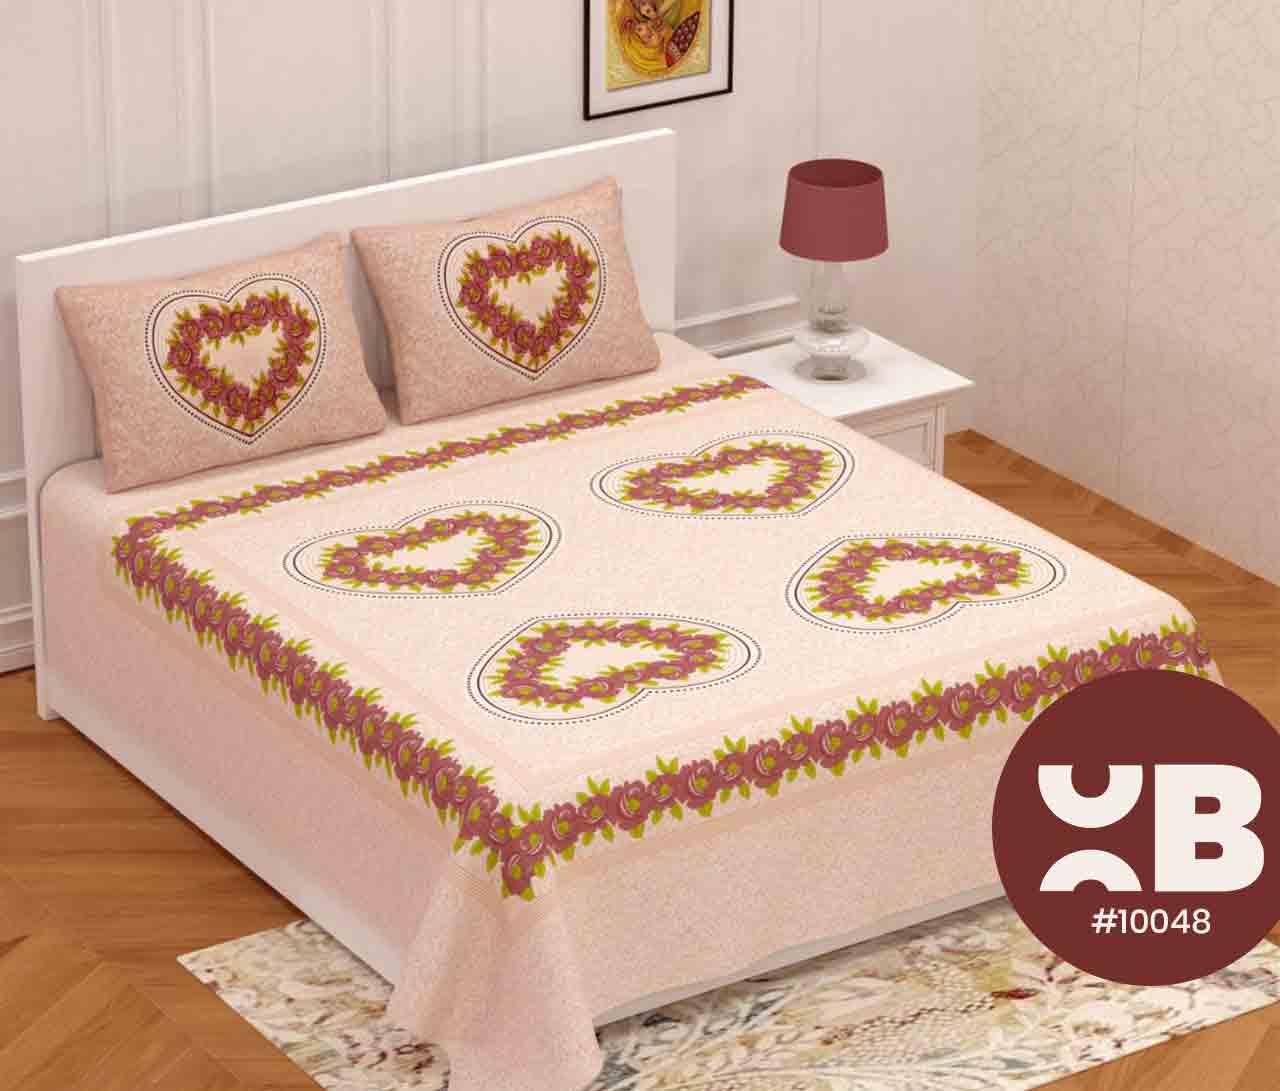 Super Soft Heart & Rose Design Queen Size Double Bedsheet With Two Pillow Covers (100x100)